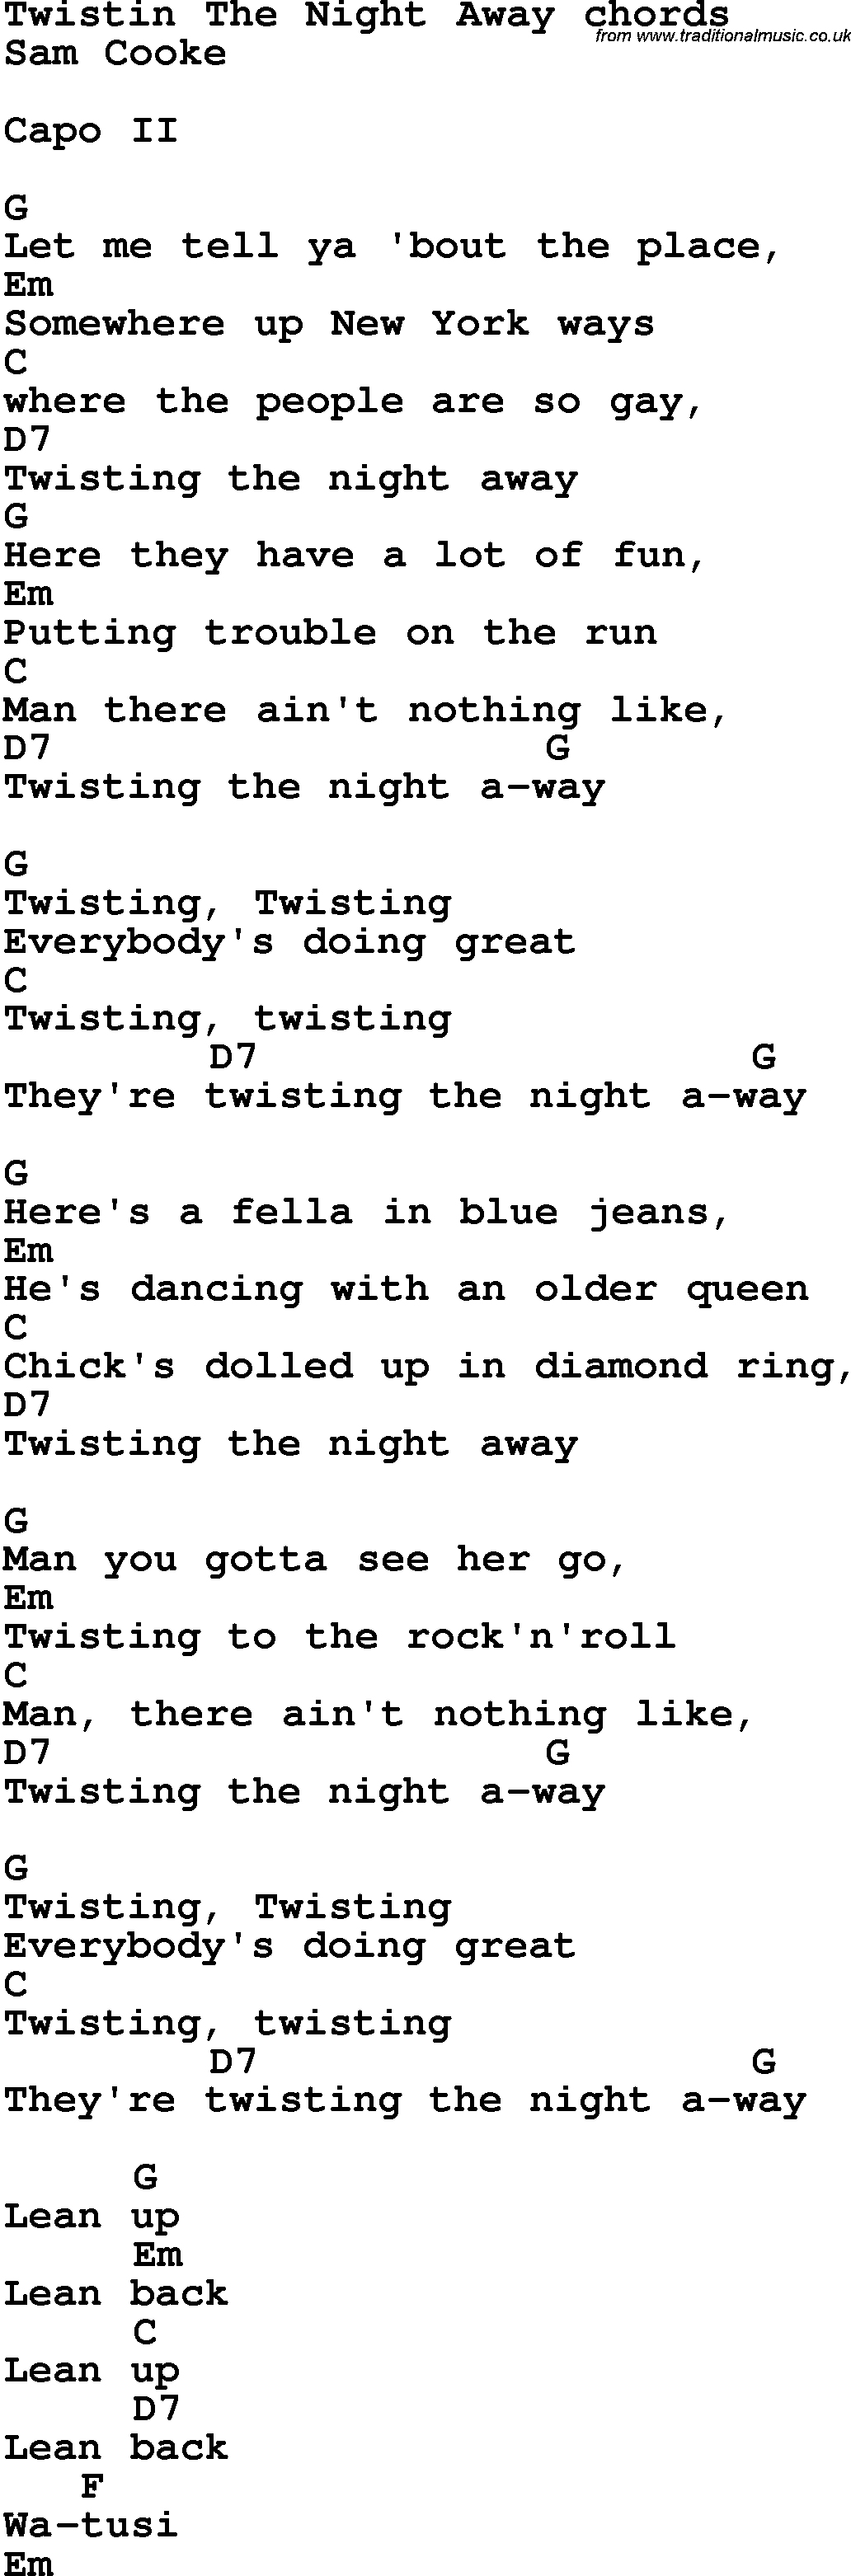 Song Lyrics with guitar chords for Twistin The Night Away